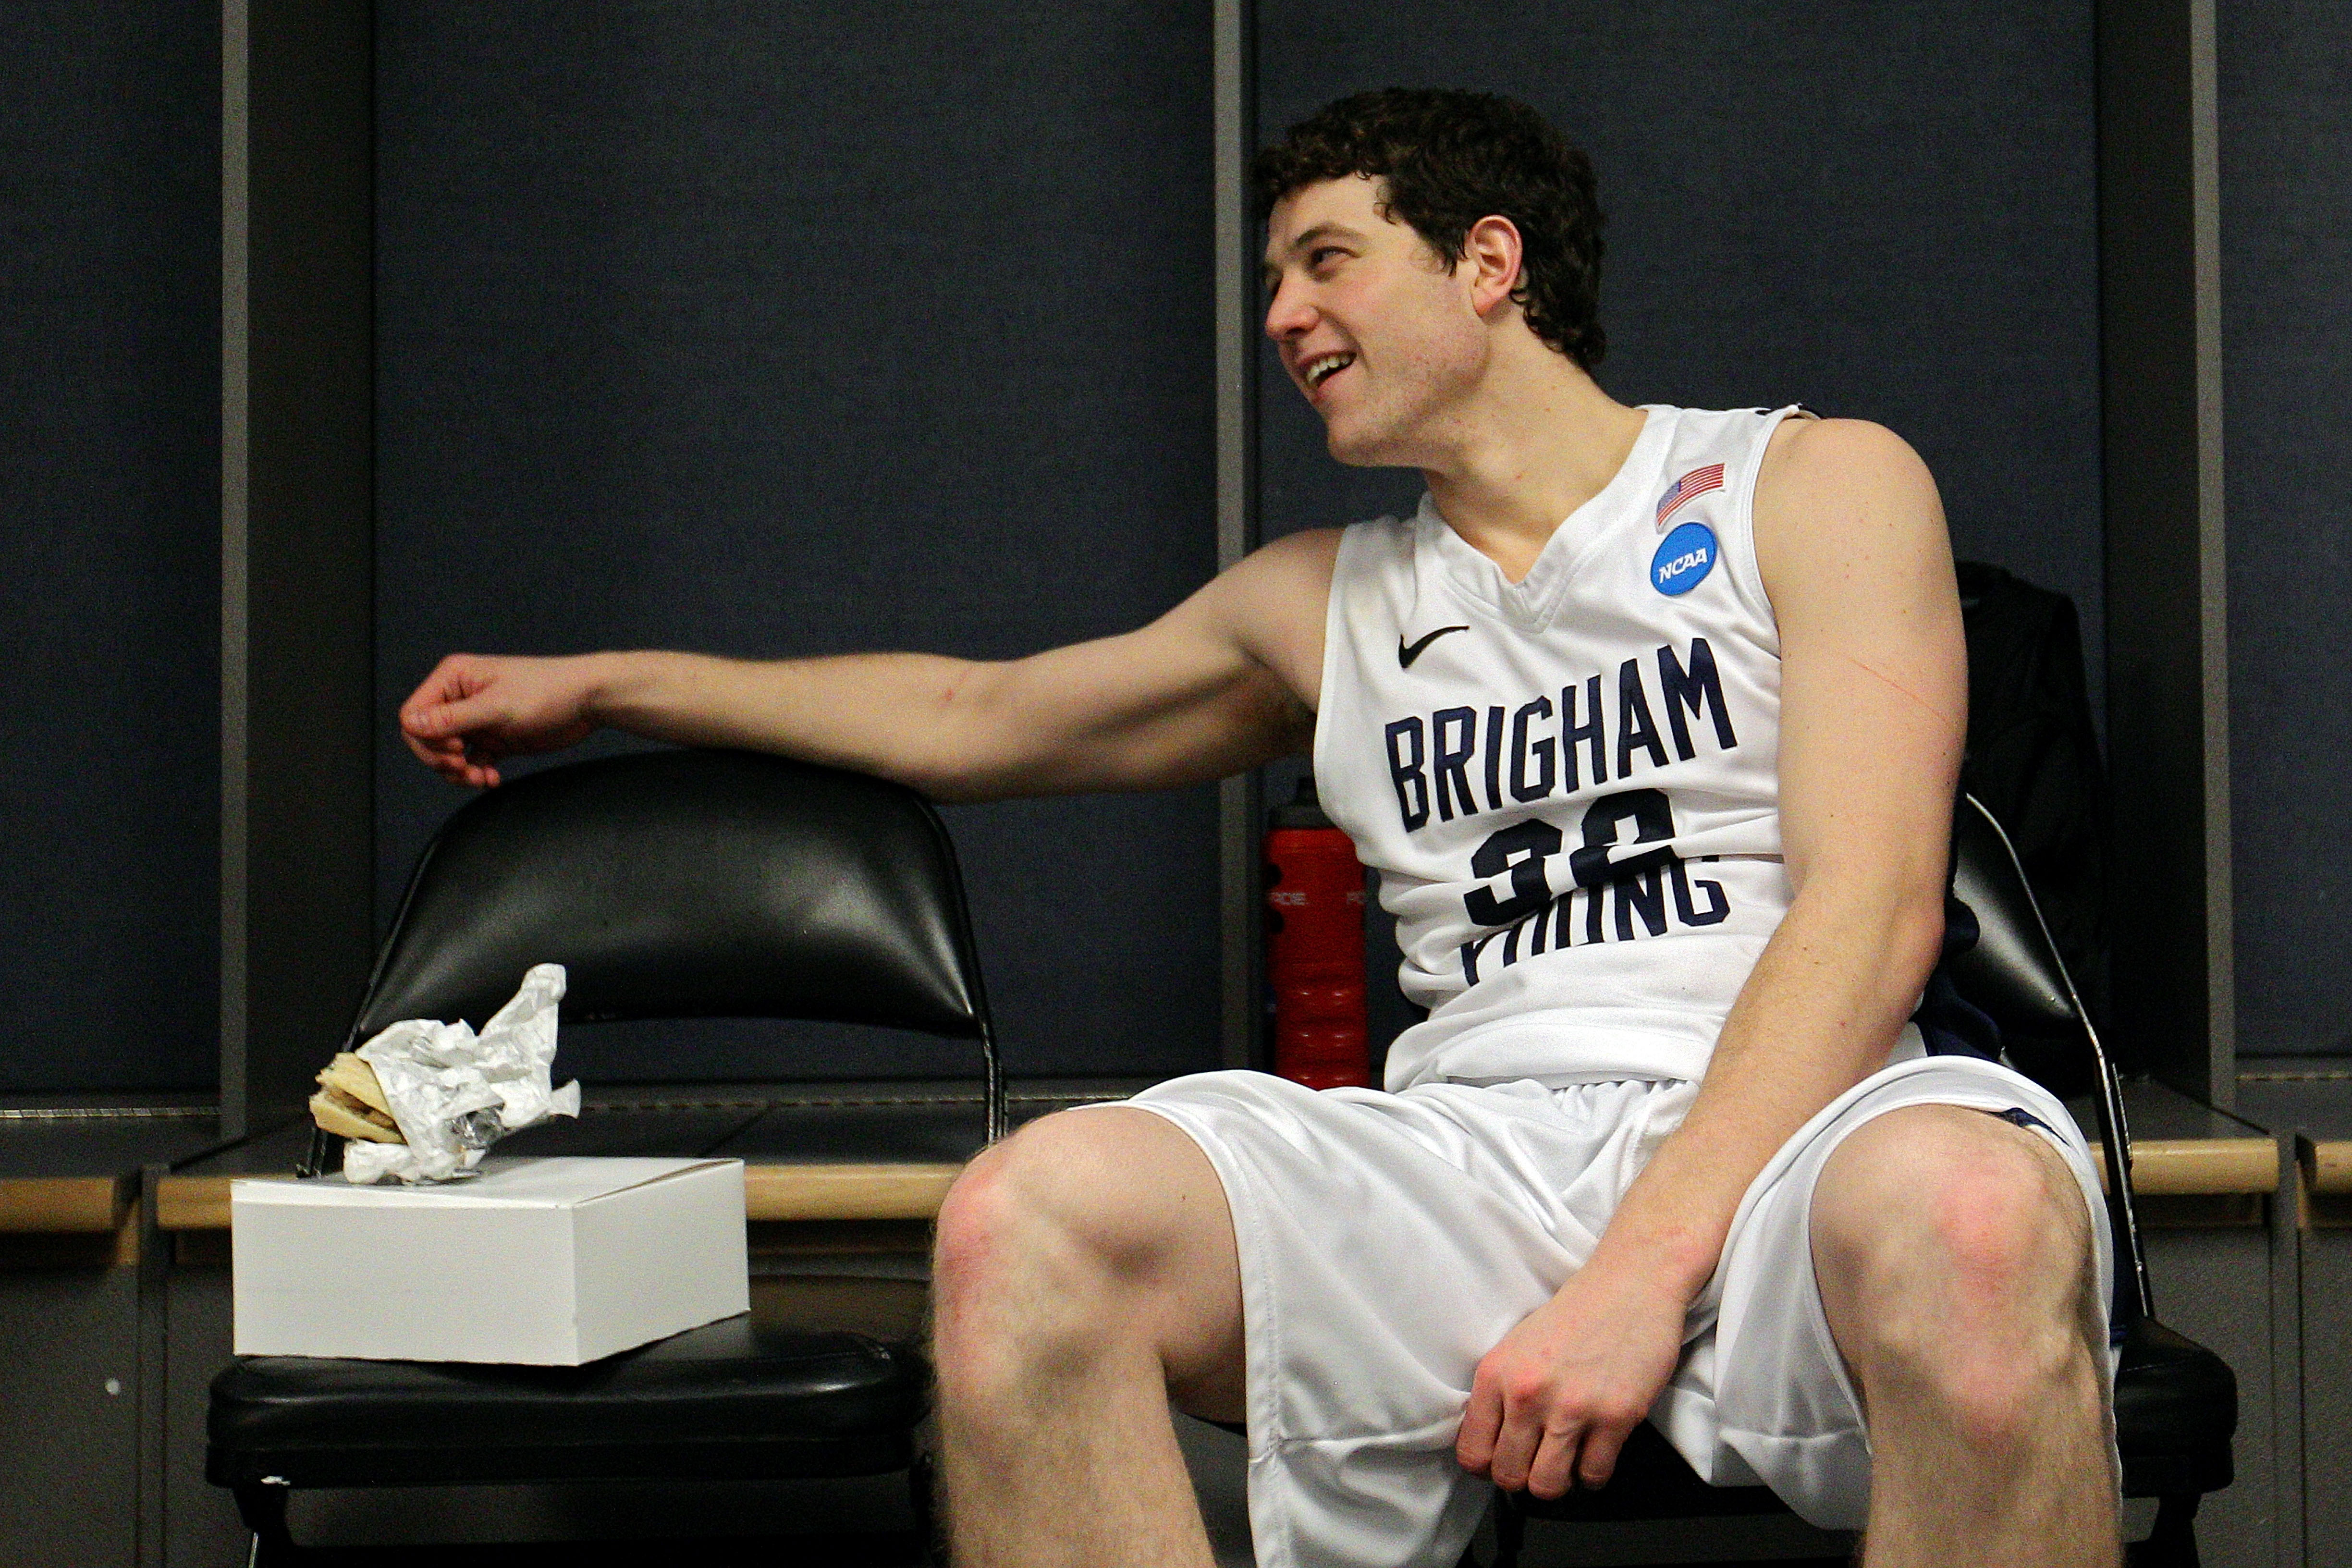 DENVER, CO - MARCH 19:  Jimmer Fredette #32 of the Brigham Young Cougars sits in the locker room after defeating the Gonzaga Bulldogs during the third round of the 2011 NCAA men's basketball tournament at Pepsi Center on March 19, 2011 in Denver, Colorado